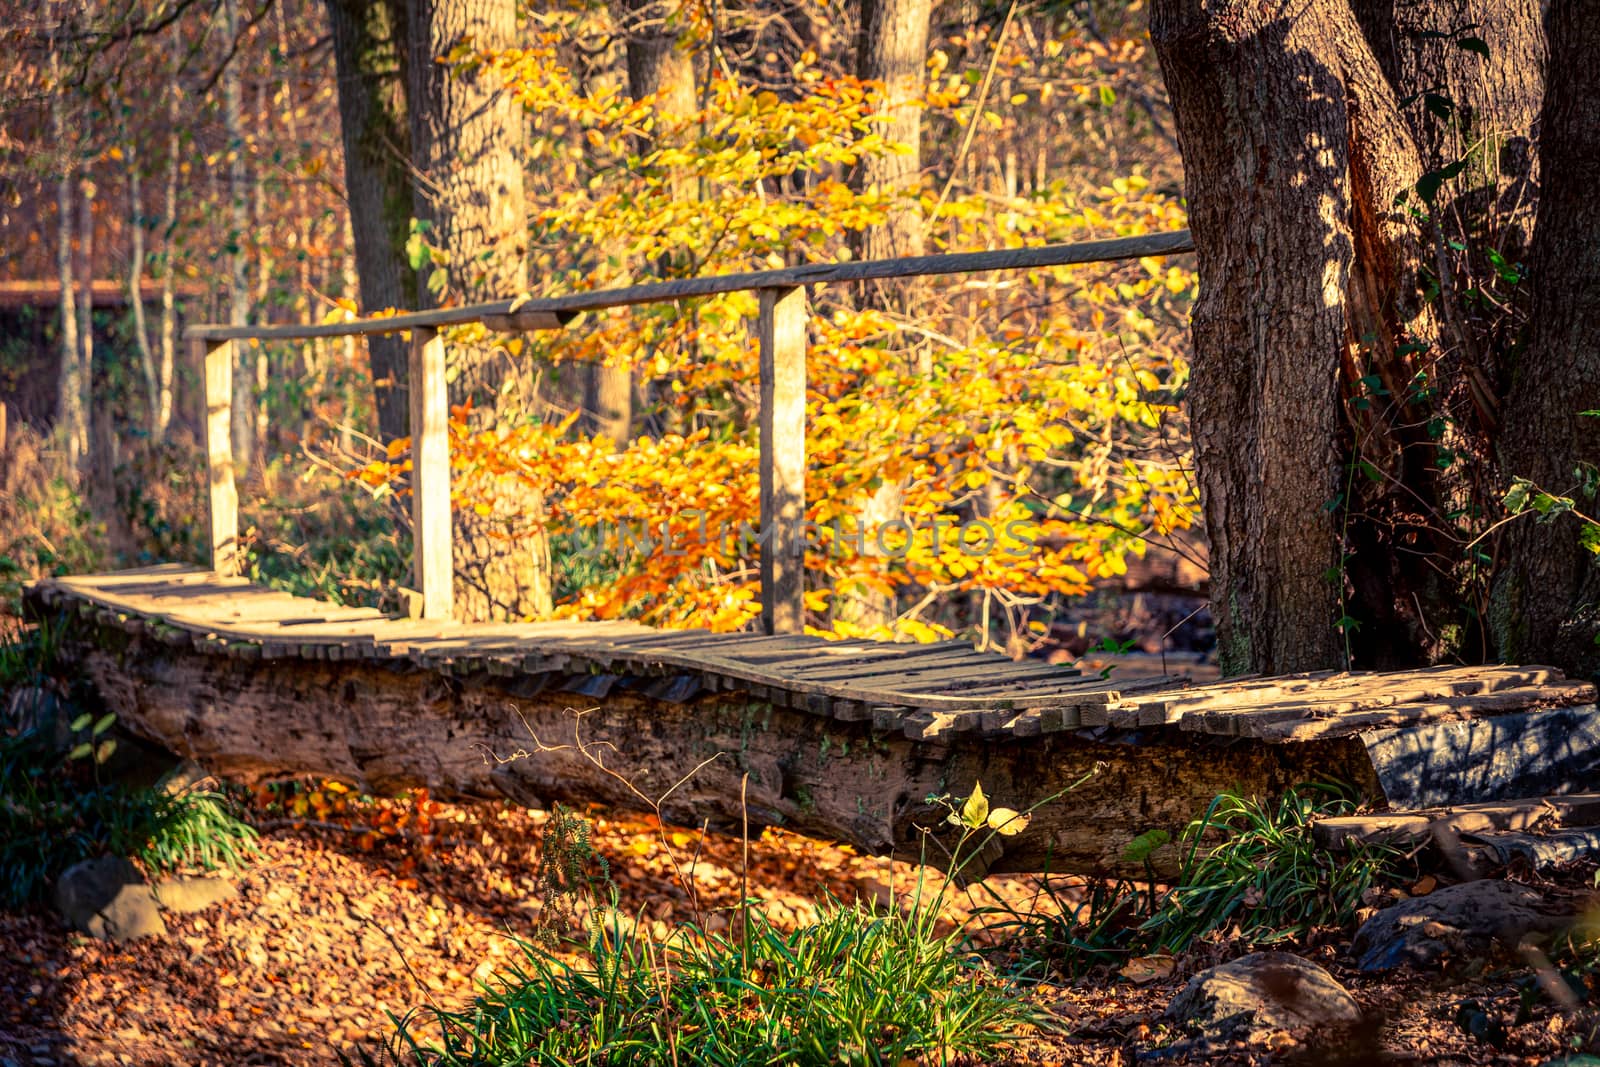 Footbridge over a creek in the forest during autumn or fall by kb79